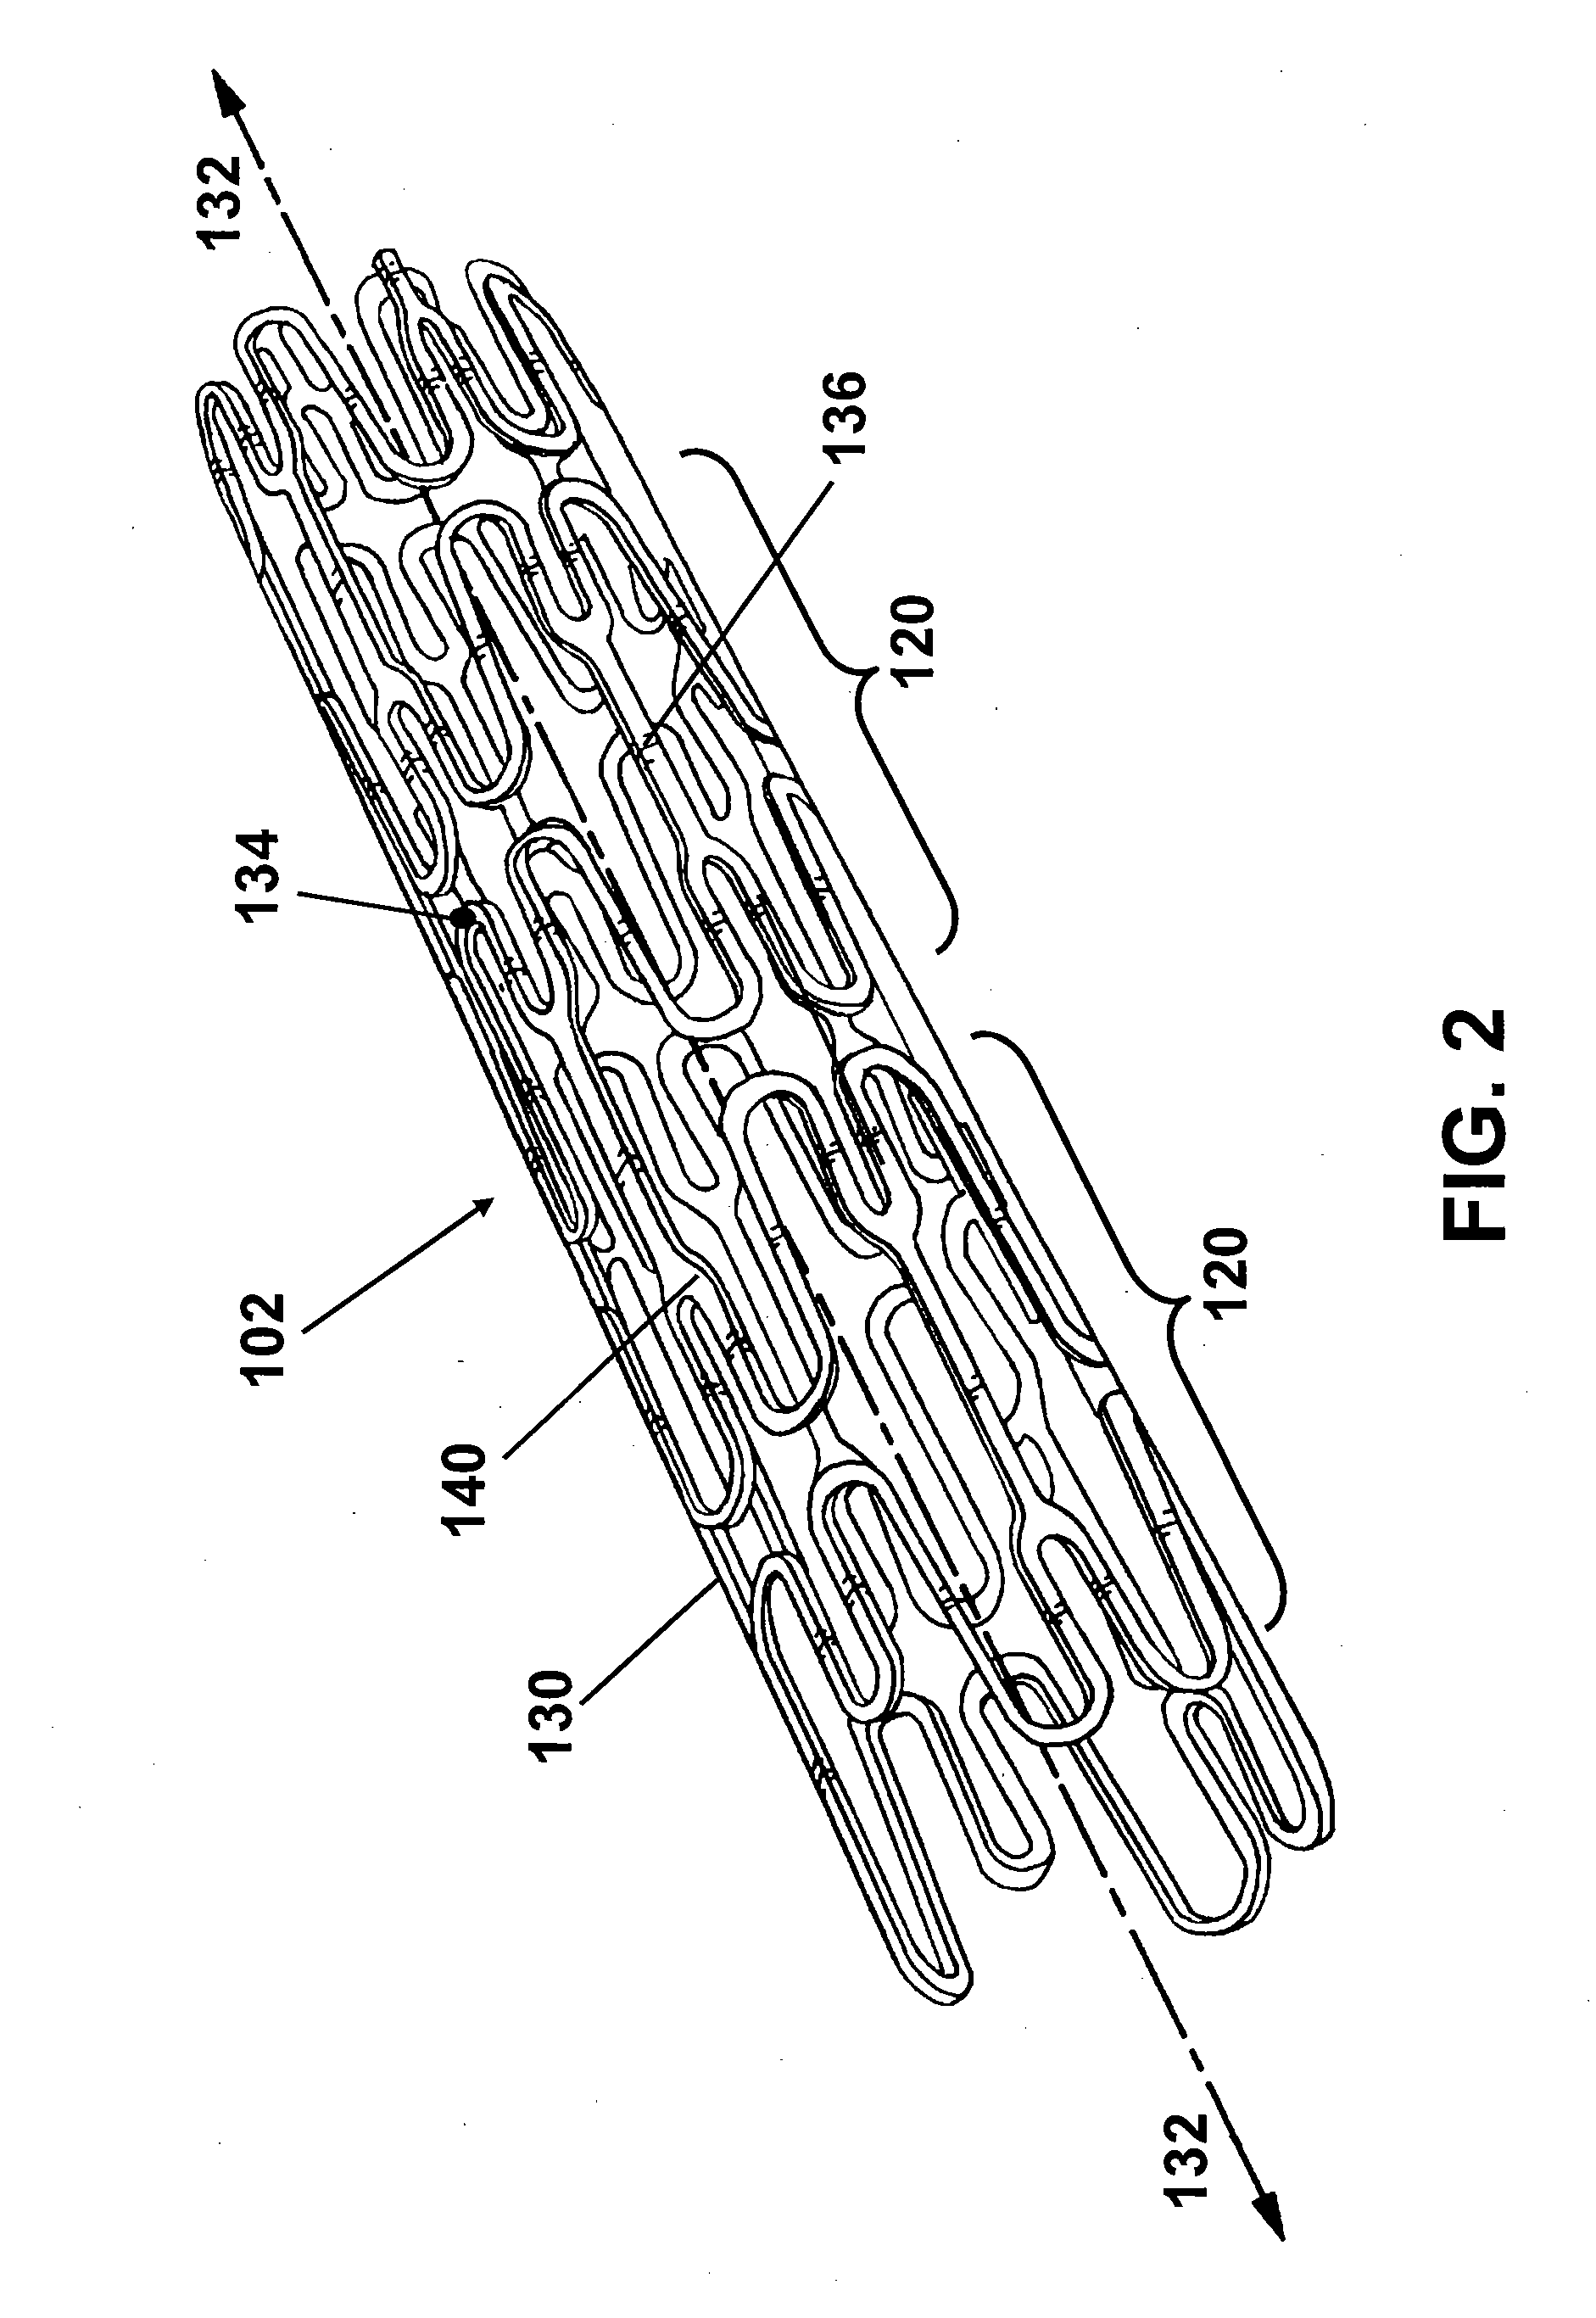 Inhibition of Calcification on an Endovascular Device